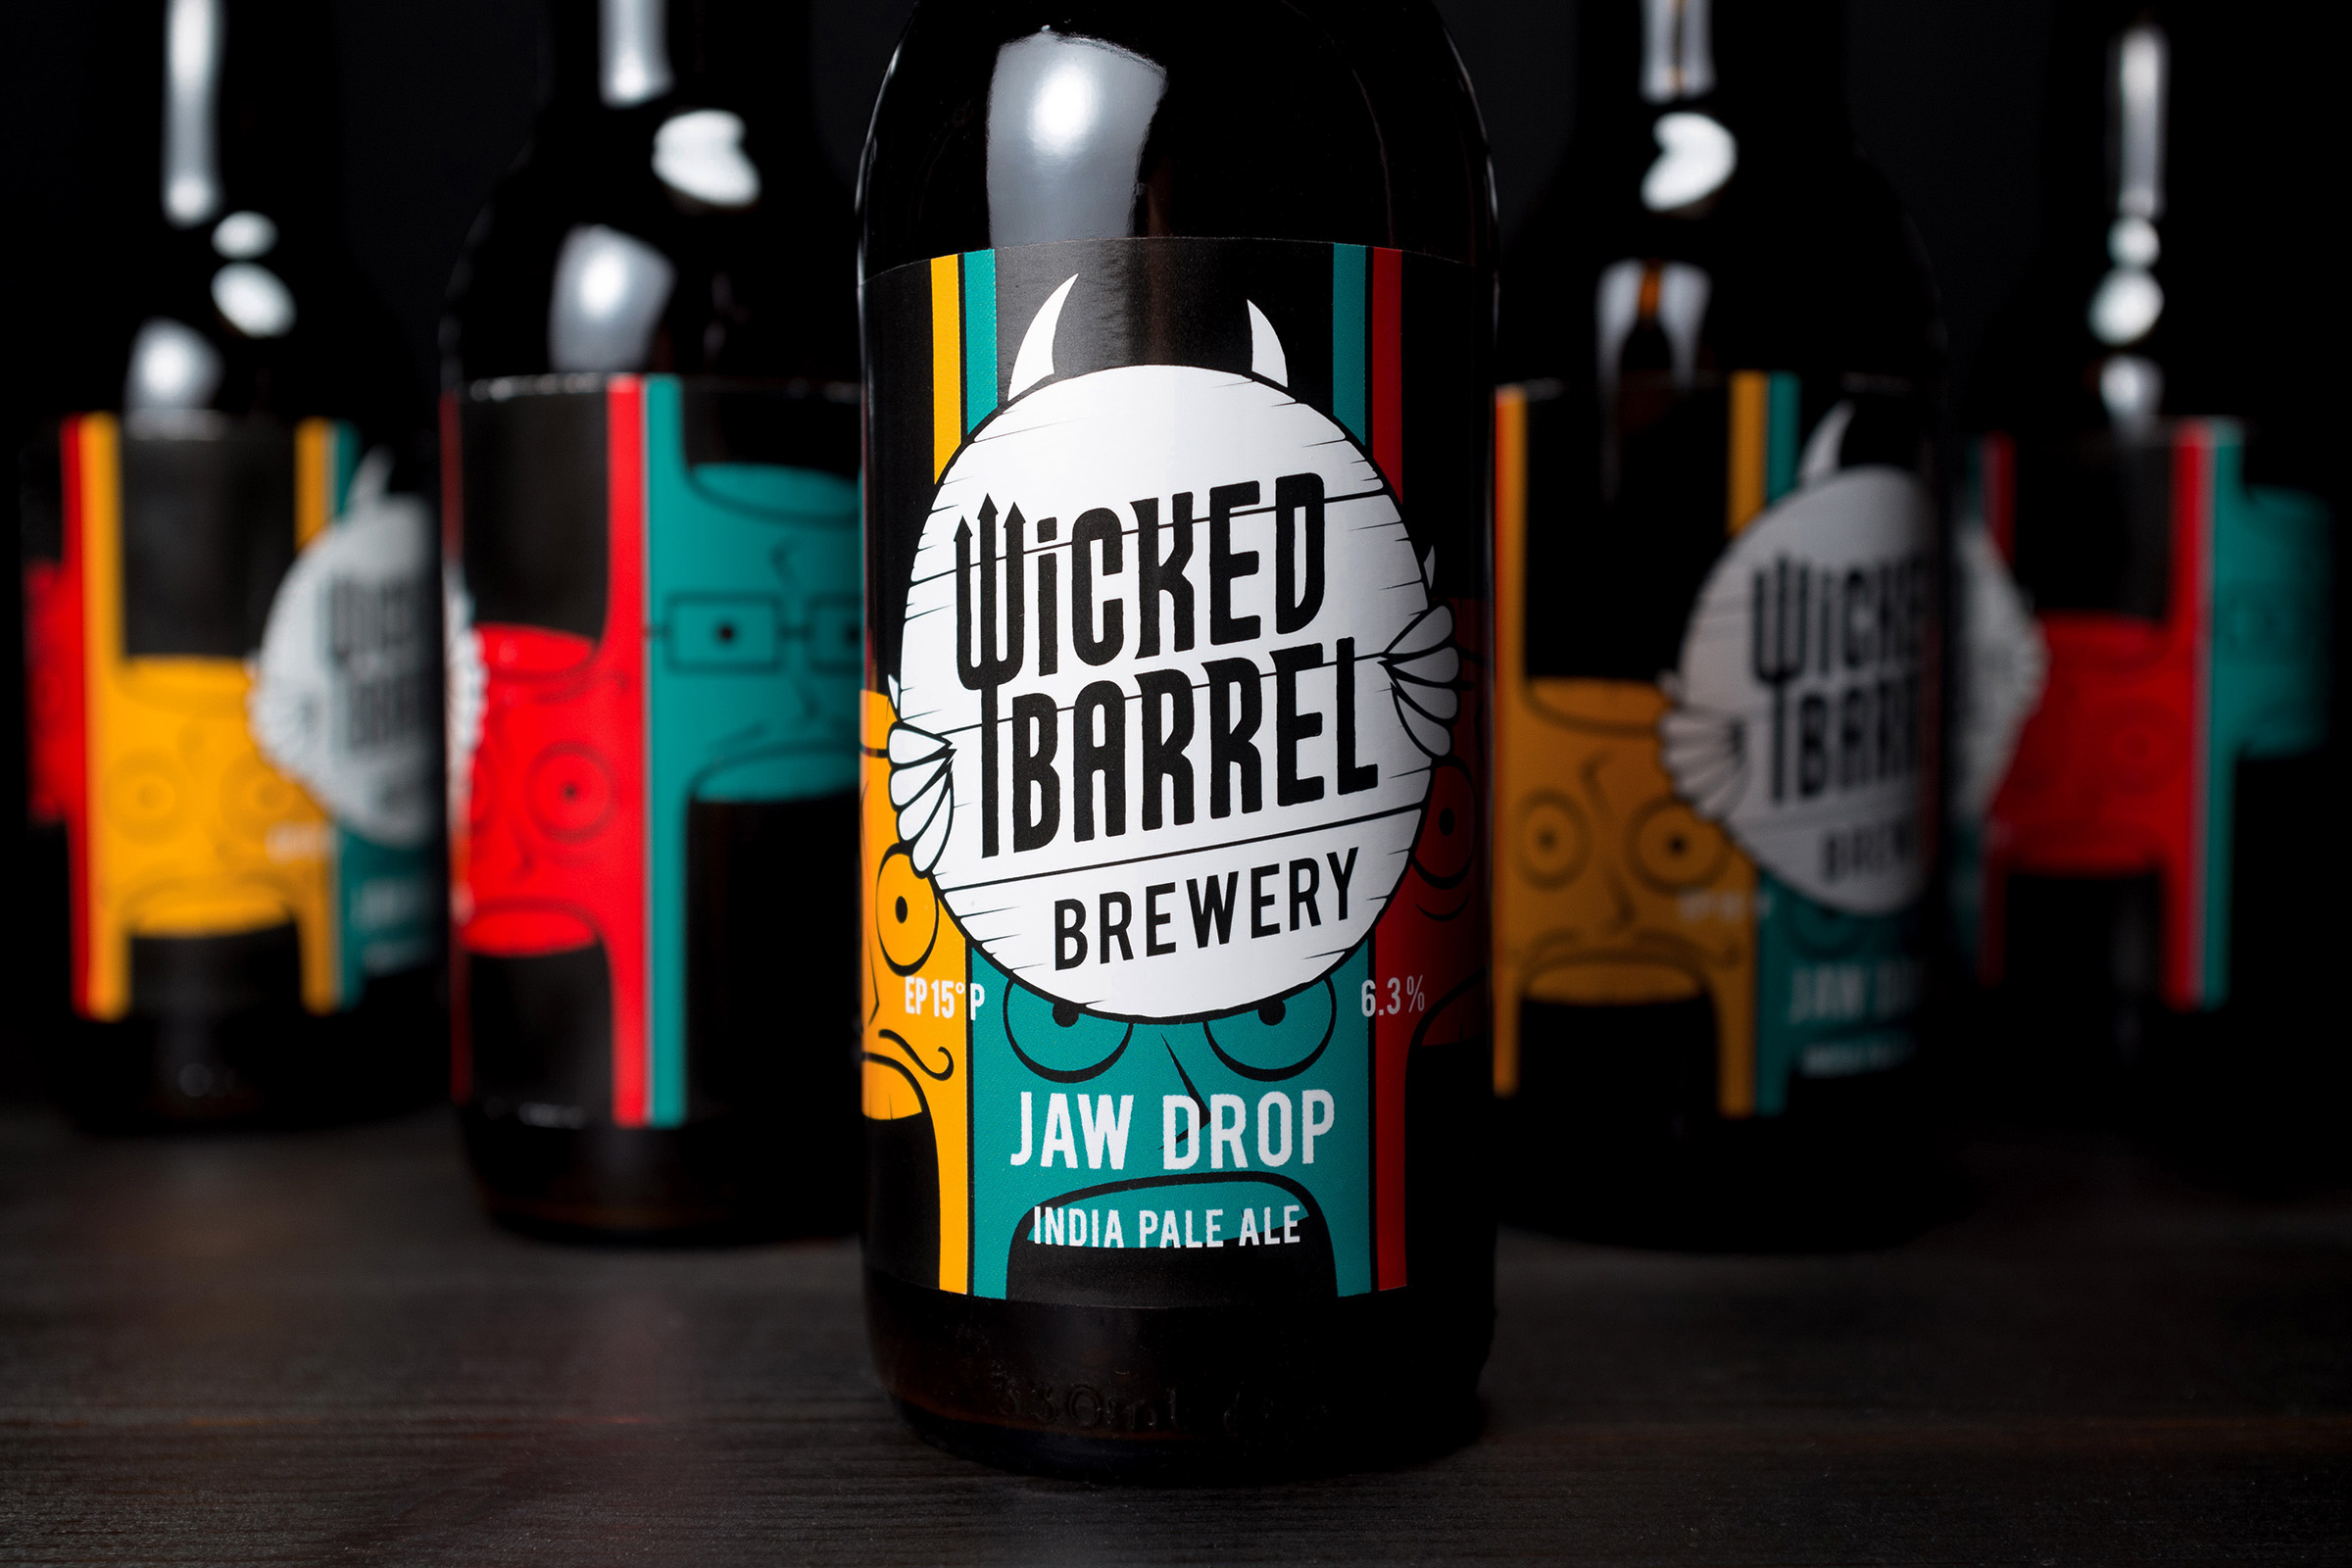 Stefan Andries – Jaw Drop by Wicked Barrel Brewery